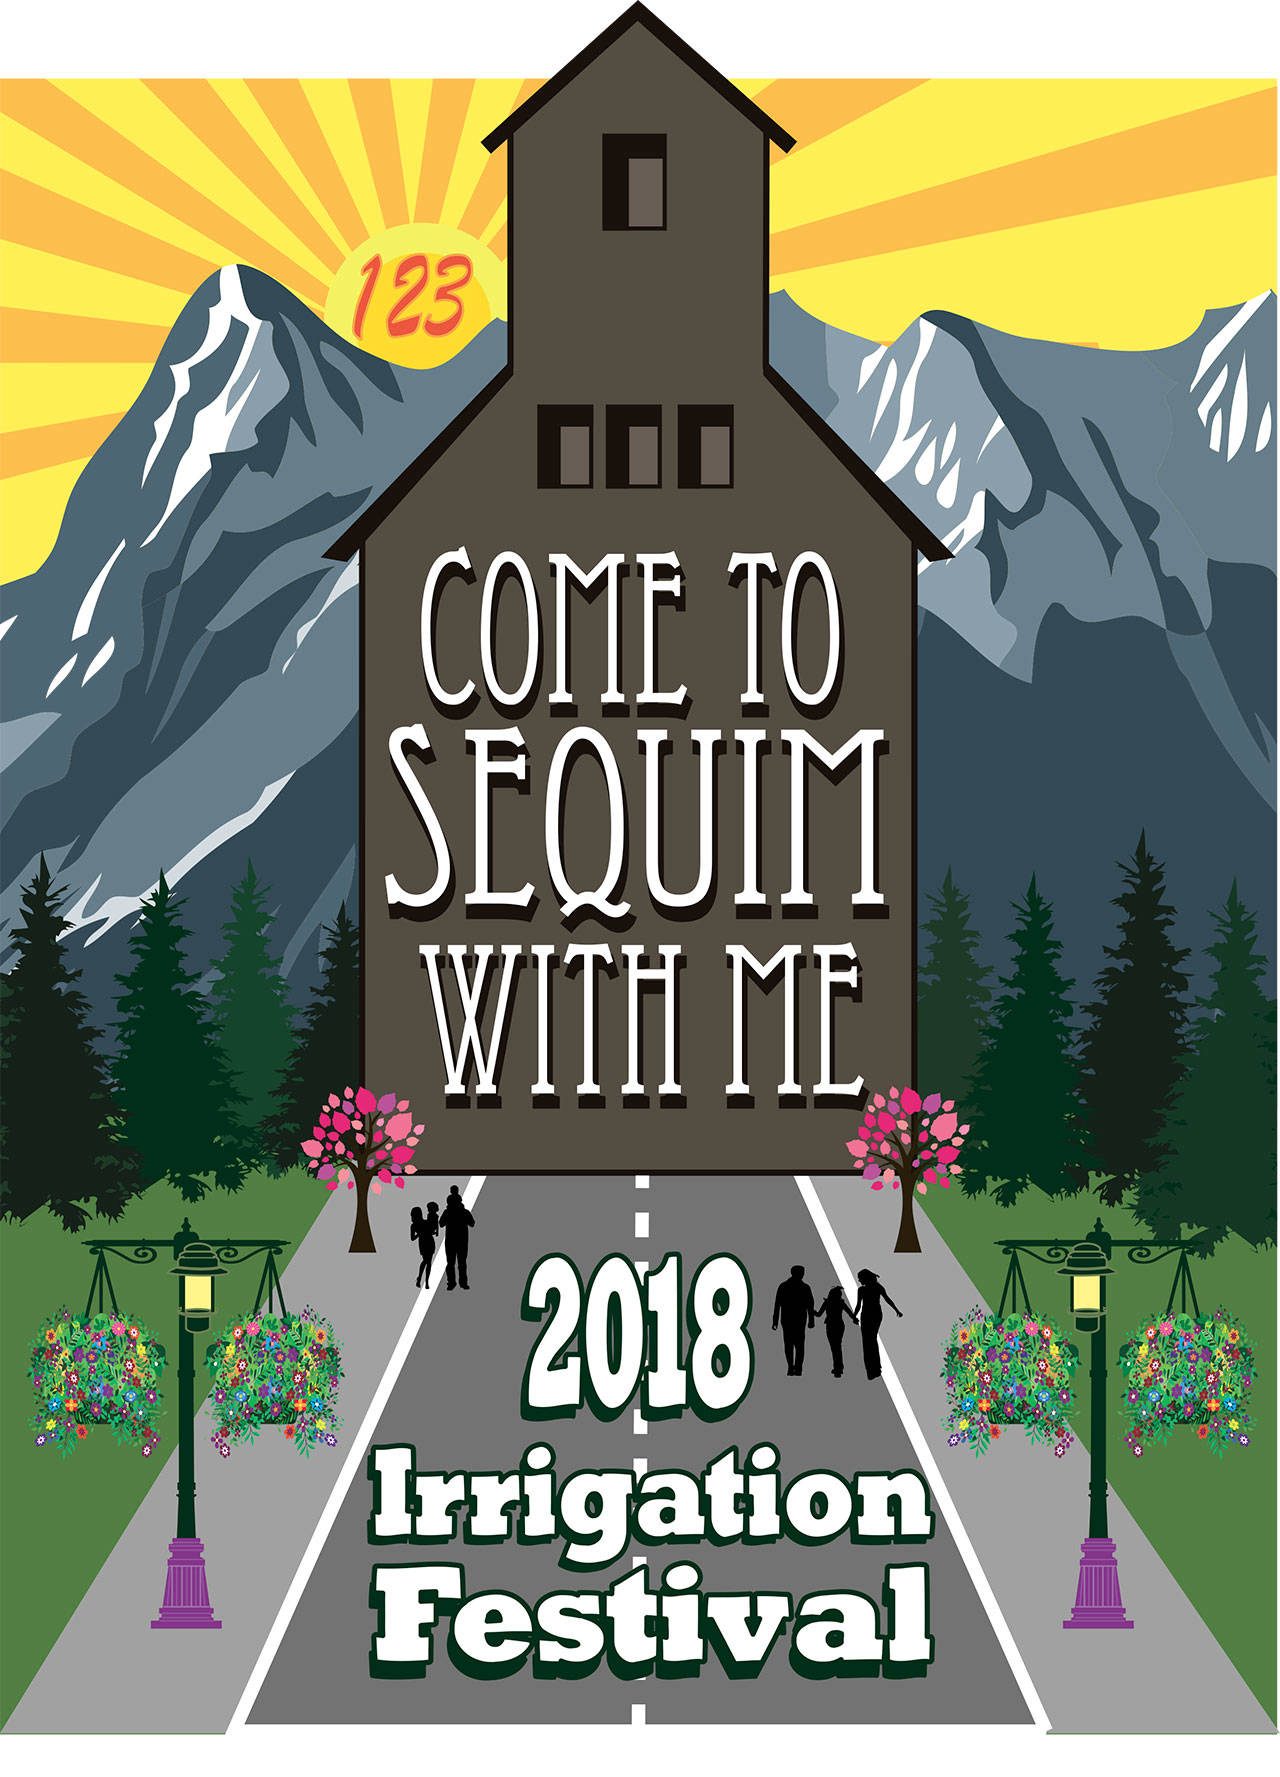 Laura Friedkin designed next year’s logo for the Sequim Irrigation Festival.